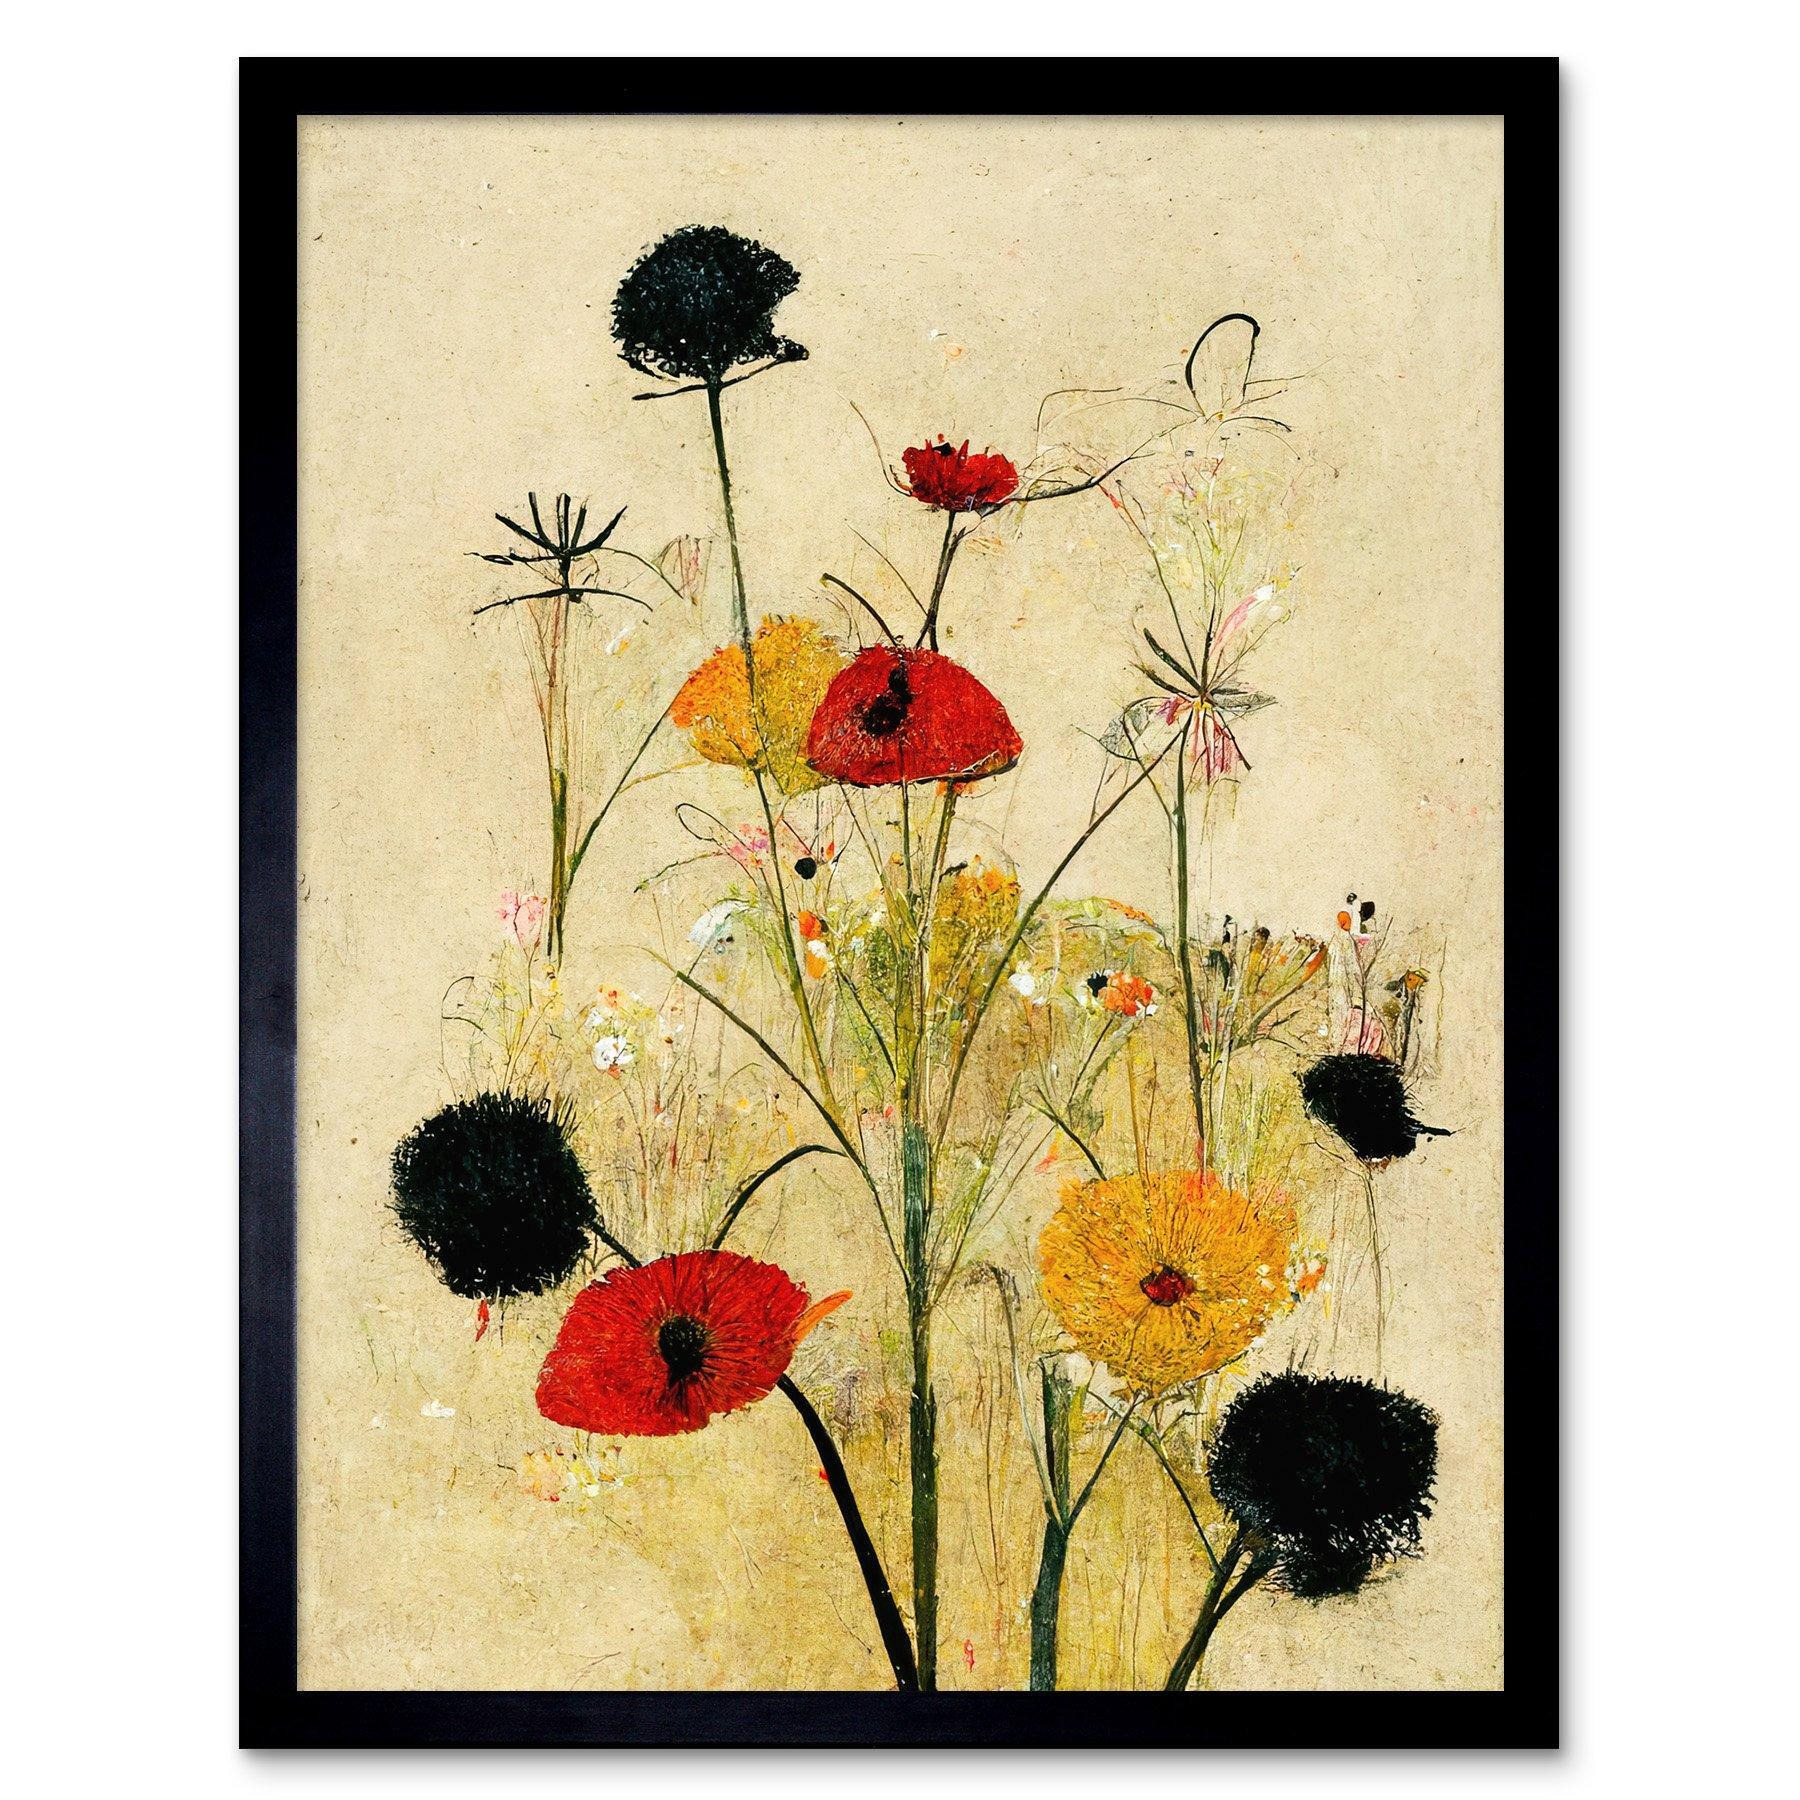 Red Poppies And Yellow Marigolds Wild Flowers Art Print Framed Poster Wall Decor 12x16 inch - image 1